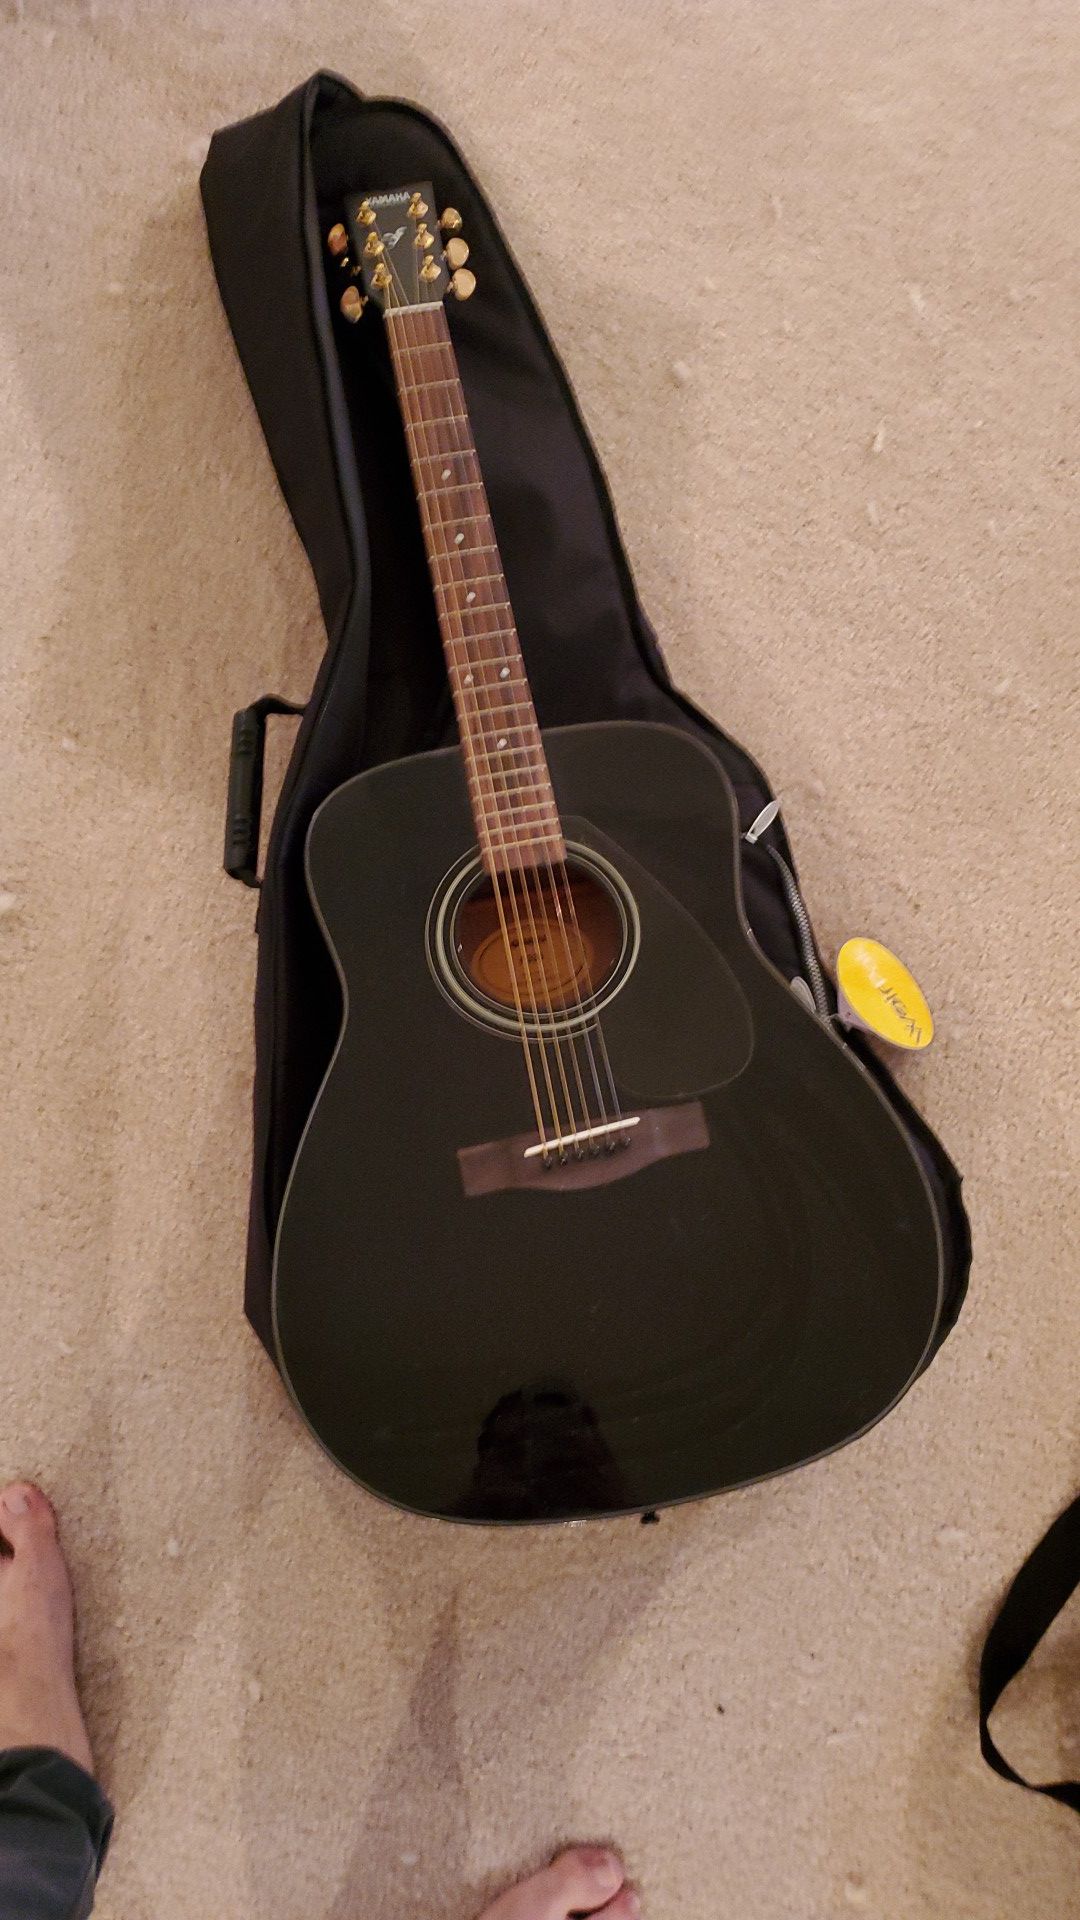 Black Yamaha guitar with case and a capo